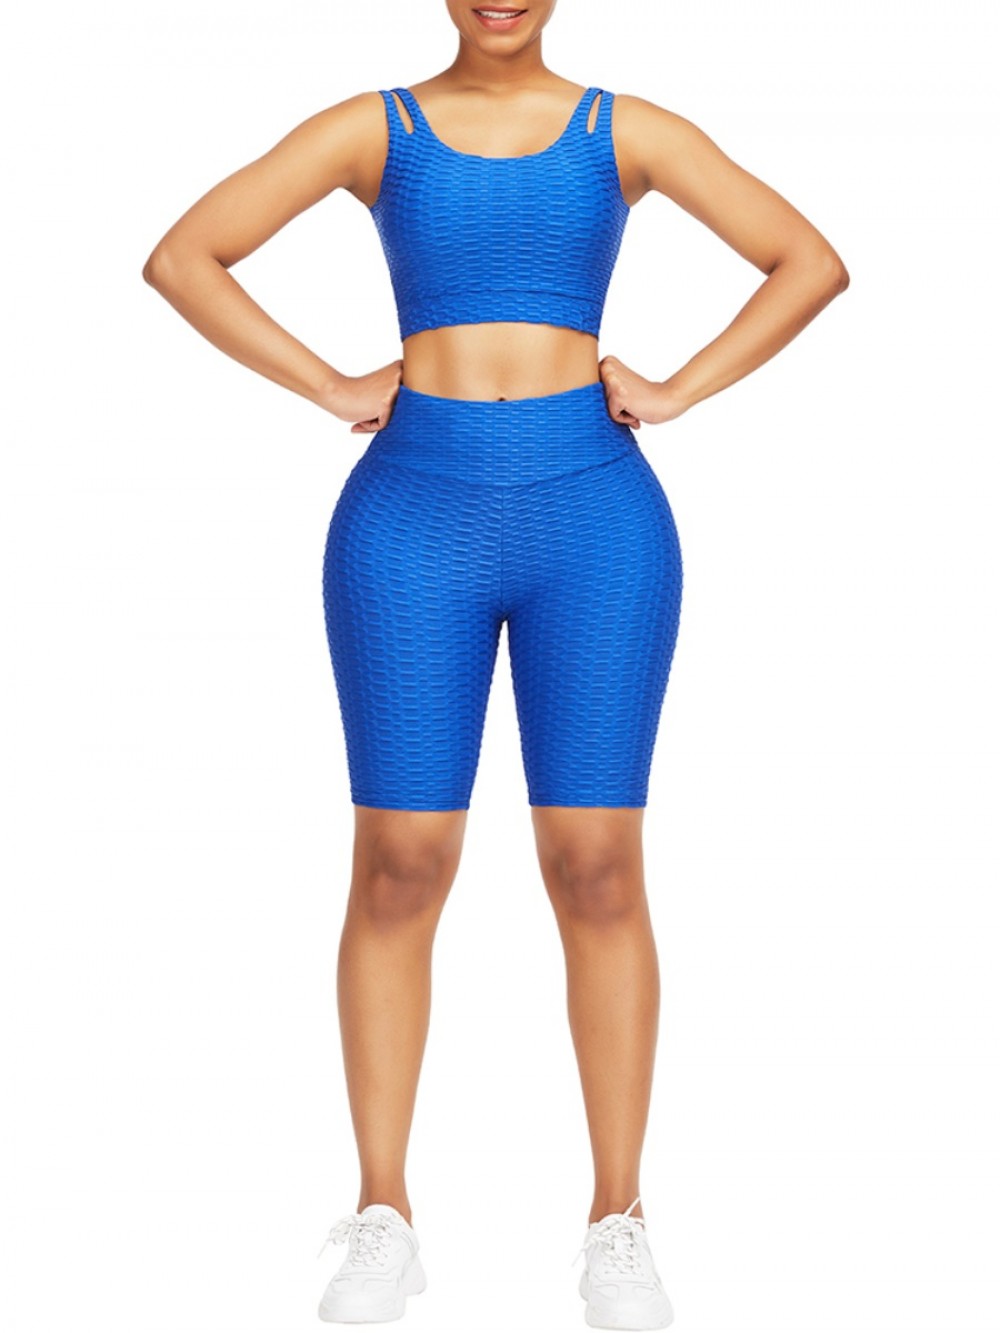 Stretchy Blue Suit With Pocket Wide Waistband Exercise